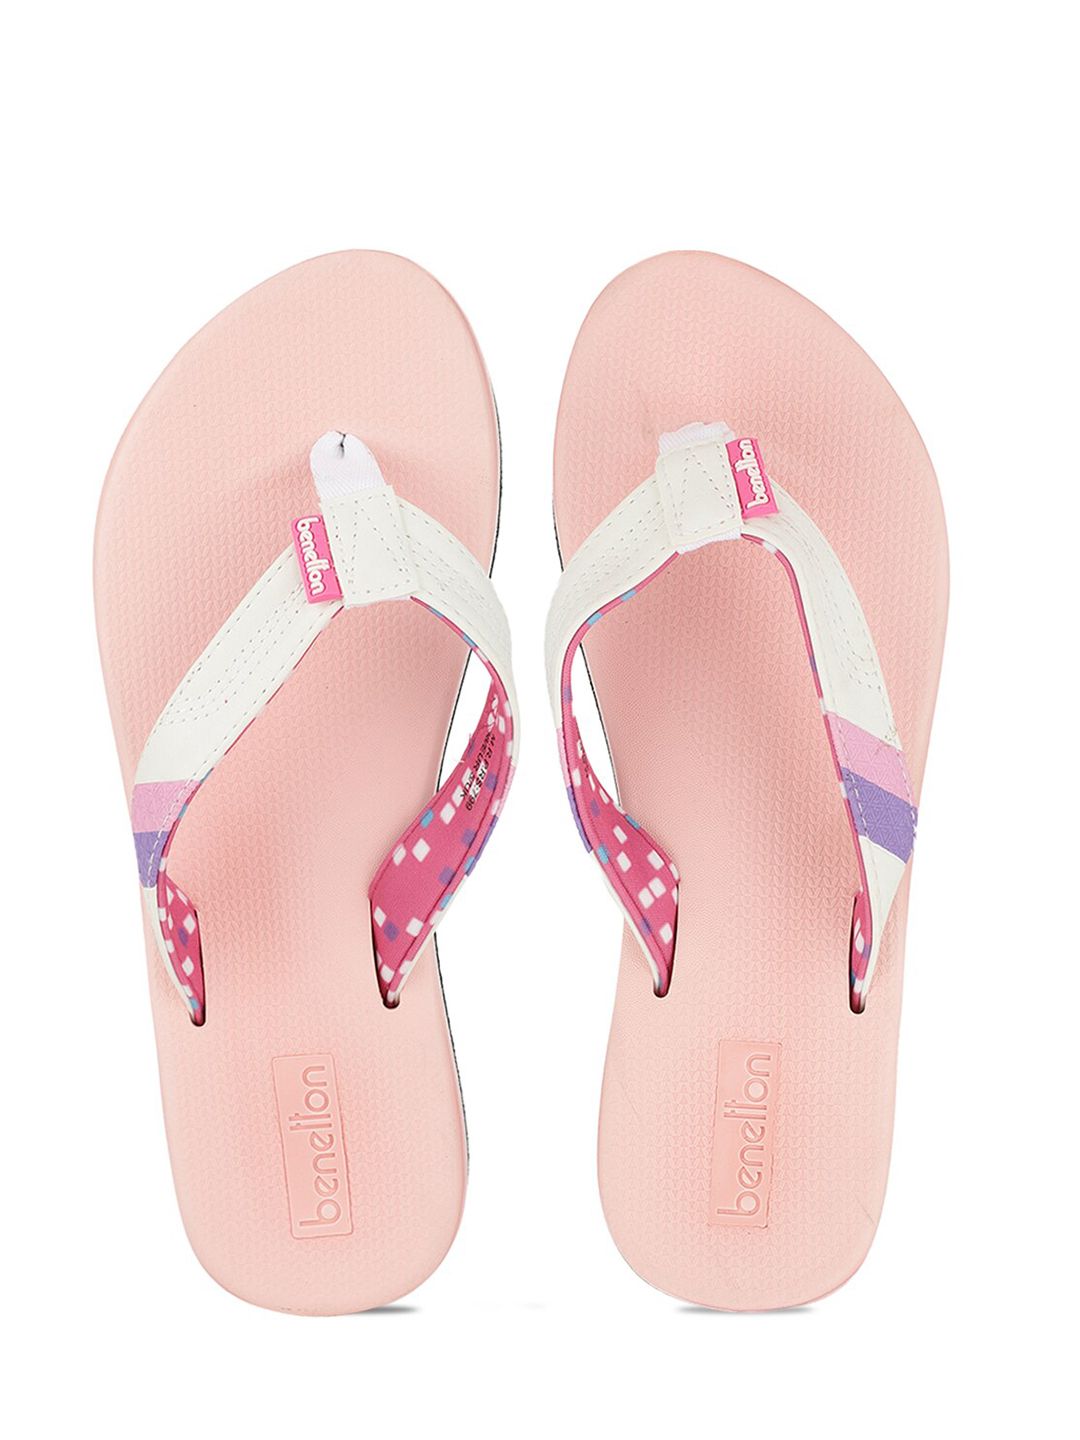 United Colors of Benetton Women Pink Rubber Thong Flip-Flops Price in India